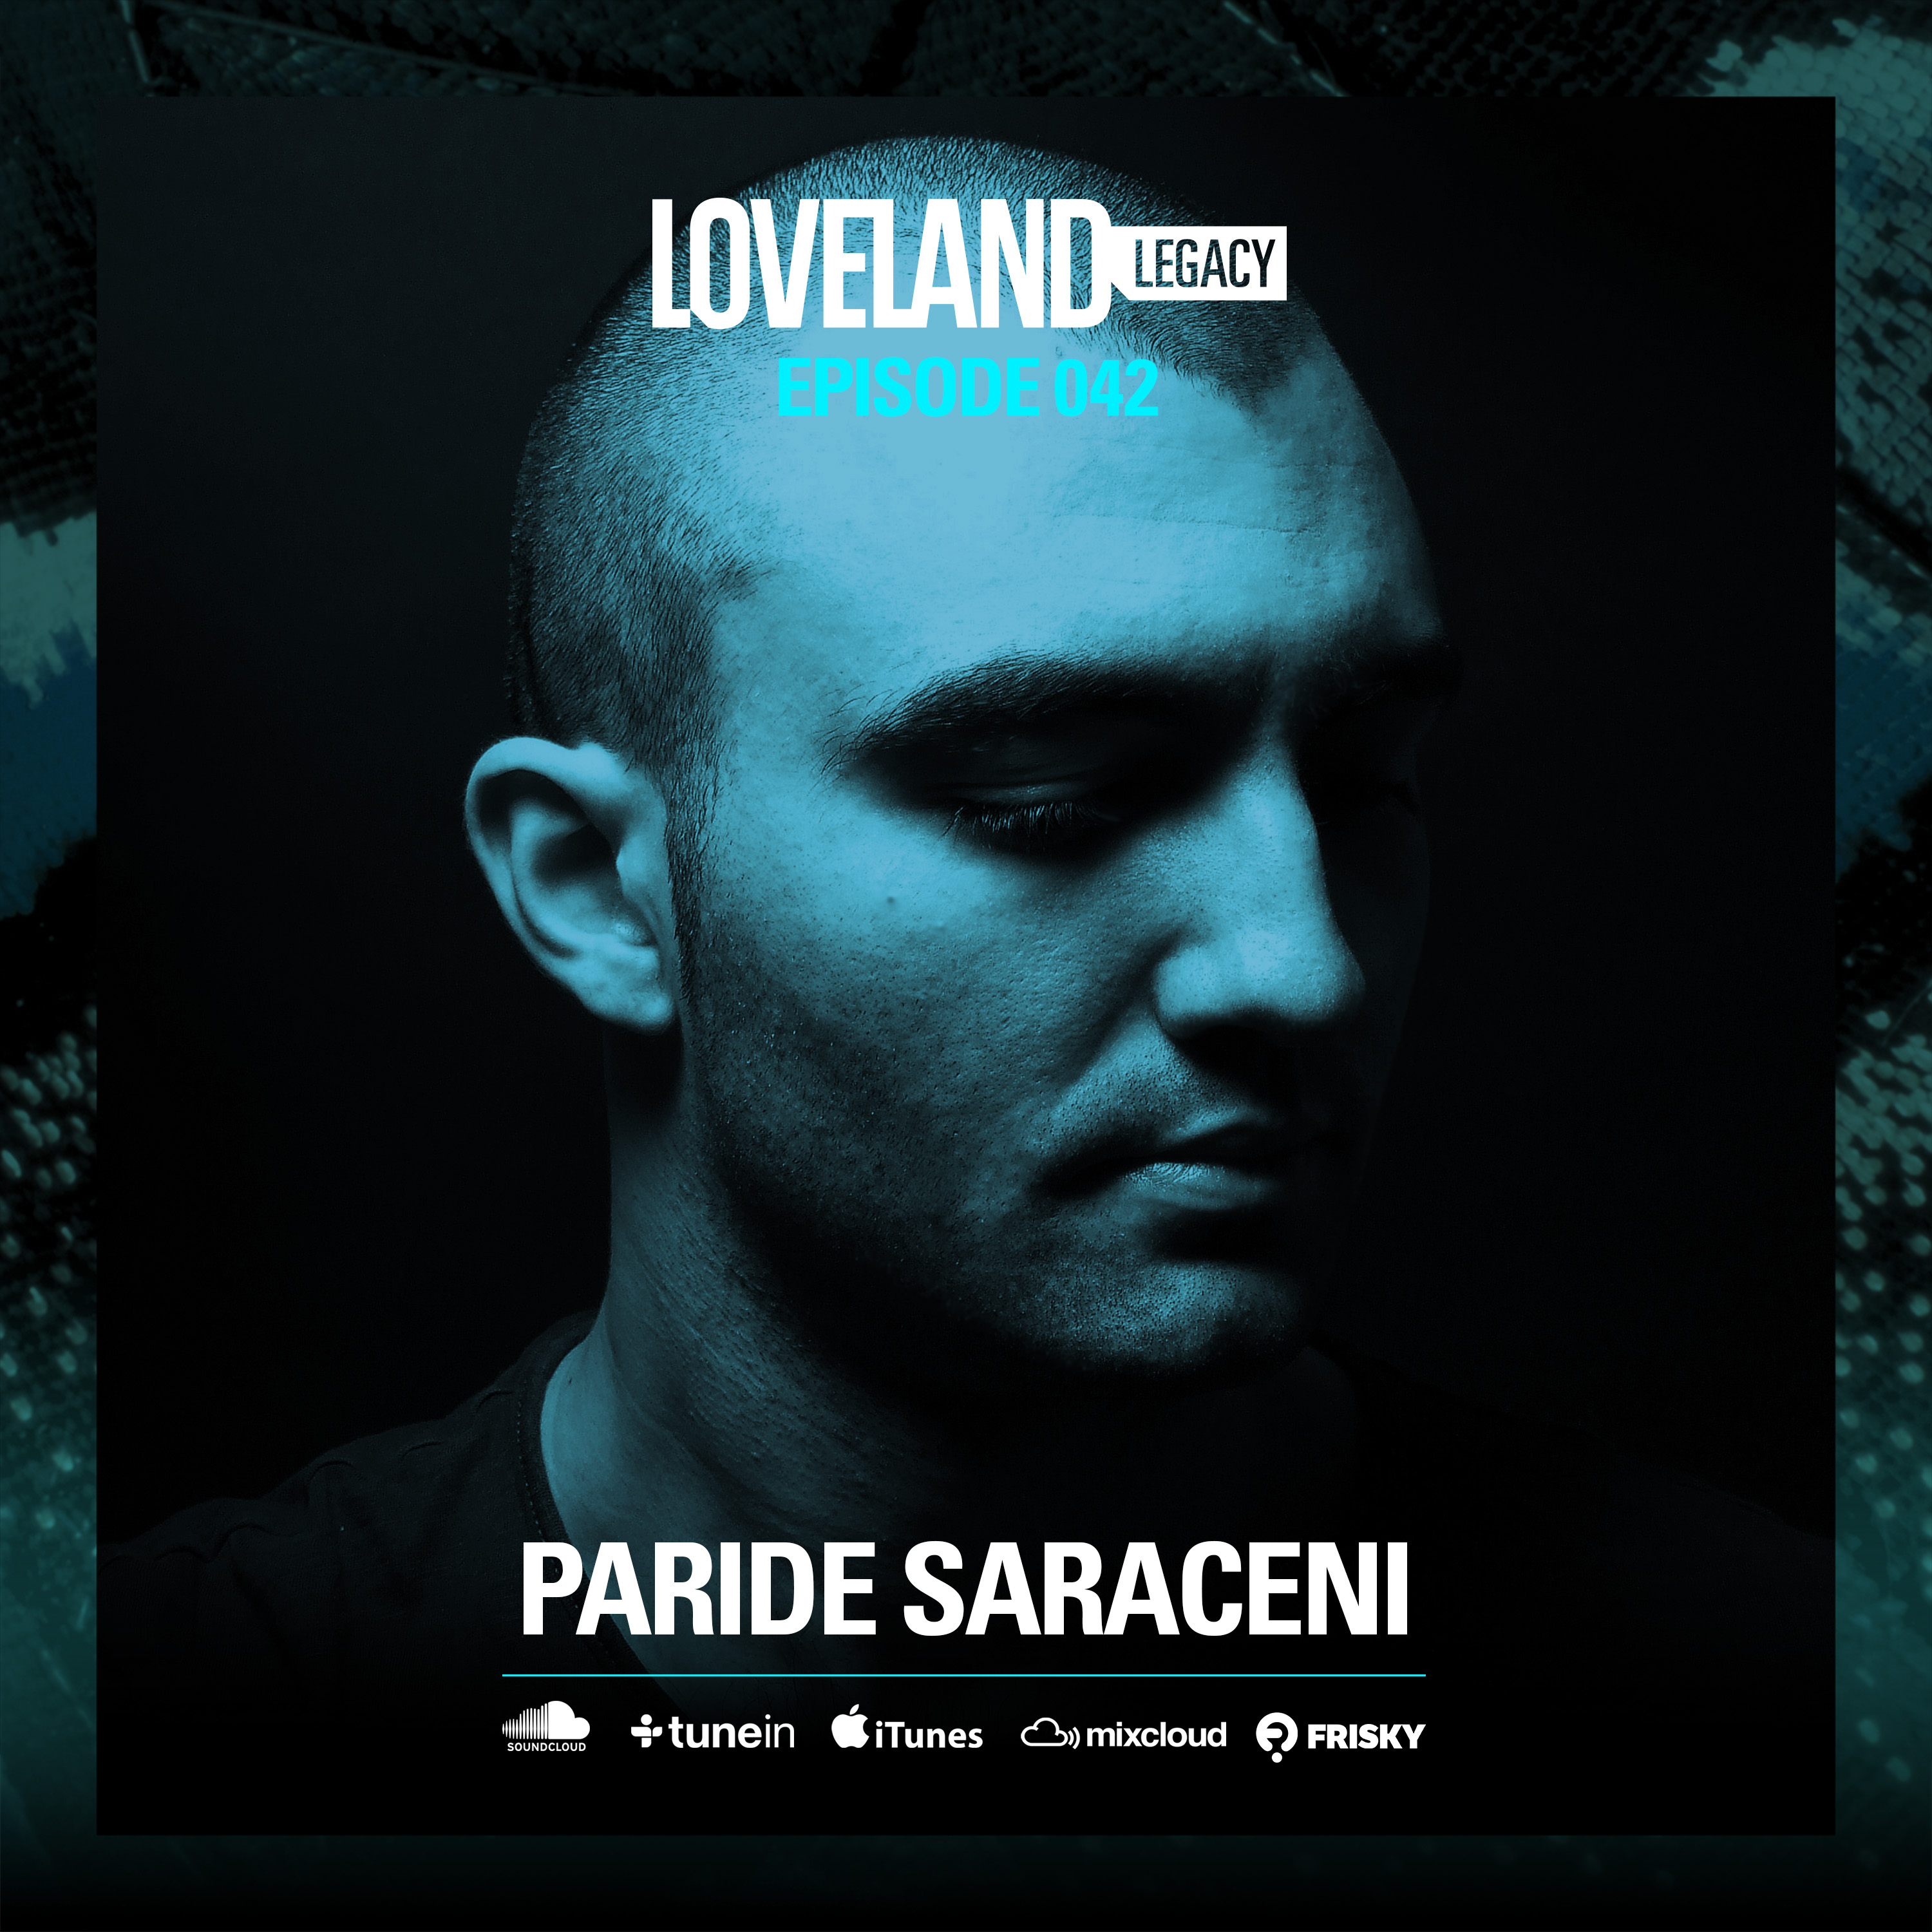 Paride Saraceni did an excelent job of taking the Truesoul stage to the next level with his mixture of funky and straight four to the floor techno! Listen to his full set from Drumcode at Loveland Barcelona 2016 in episode 42 of Loveland Legacy. Afterlife at Loveland ADE | October 20th 2016 | SOLD OUT bit.ly/AfterlifeADE2016 ENTER. presents EXPERIENCES. at Loveland ADE | October 21st 2016 | SOLD OUT bit.ly/EnterADE2016 Circoloco at Loveland ADE | October 22nd 2016 | SOLD OUT bit.ly/CircolocoADE2016